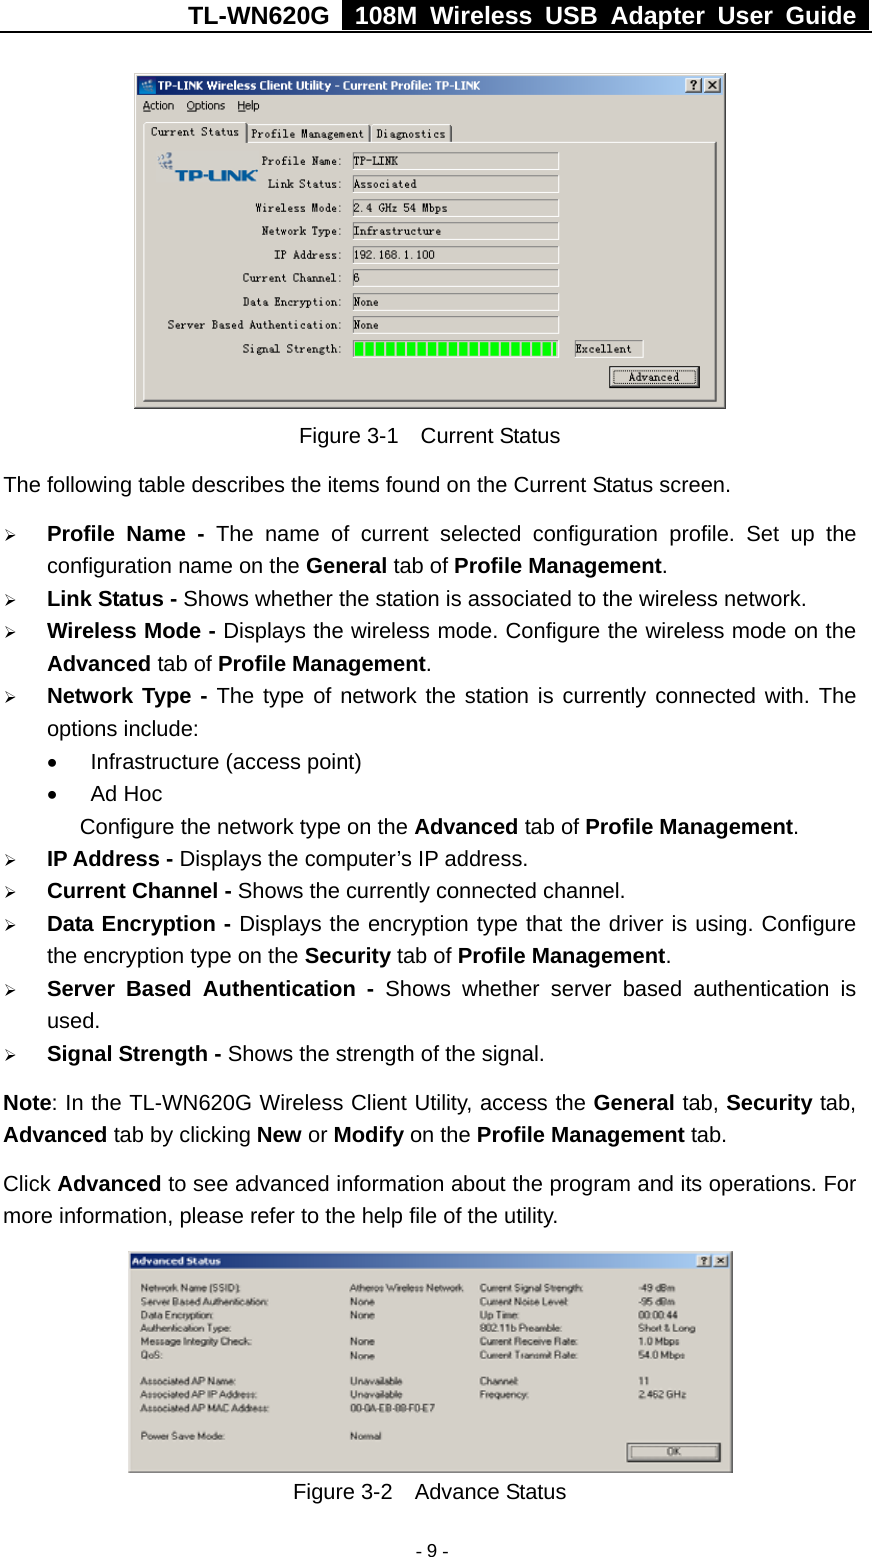 TL-WN620G   108M Wireless USB Adapter User Guide    - 9 - Figure 3-1  Current Status The following table describes the items found on the Current Status screen. ¾ Profile Name - The name of current selected configuration profile. Set up the configuration name on the General tab of Profile Management.  ¾ Link Status - Shows whether the station is associated to the wireless network. ¾ Wireless Mode - Displays the wireless mode. Configure the wireless mode on the Advanced tab of Profile Management. ¾ Network Type - The type of network the station is currently connected with. The options include: •  Infrastructure (access point) • Ad Hoc       Configure the network type on the Advanced tab of Profile Management. ¾ IP Address - Displays the computer’s IP address. ¾ Current Channel - Shows the currently connected channel. ¾ Data Encryption - Displays the encryption type that the driver is using. Configure the encryption type on the Security tab of Profile Management. ¾ Server Based Authentication - Shows whether server based authentication is used. ¾ Signal Strength - Shows the strength of the signal. Note: In the TL-WN620G Wireless Client Utility, access the General tab, Security tab, Advanced tab by clicking New or Modify on the Profile Management tab. Click Advanced to see advanced information about the program and its operations. For more information, please refer to the help file of the utility.  Figure 3-2  Advance Status 